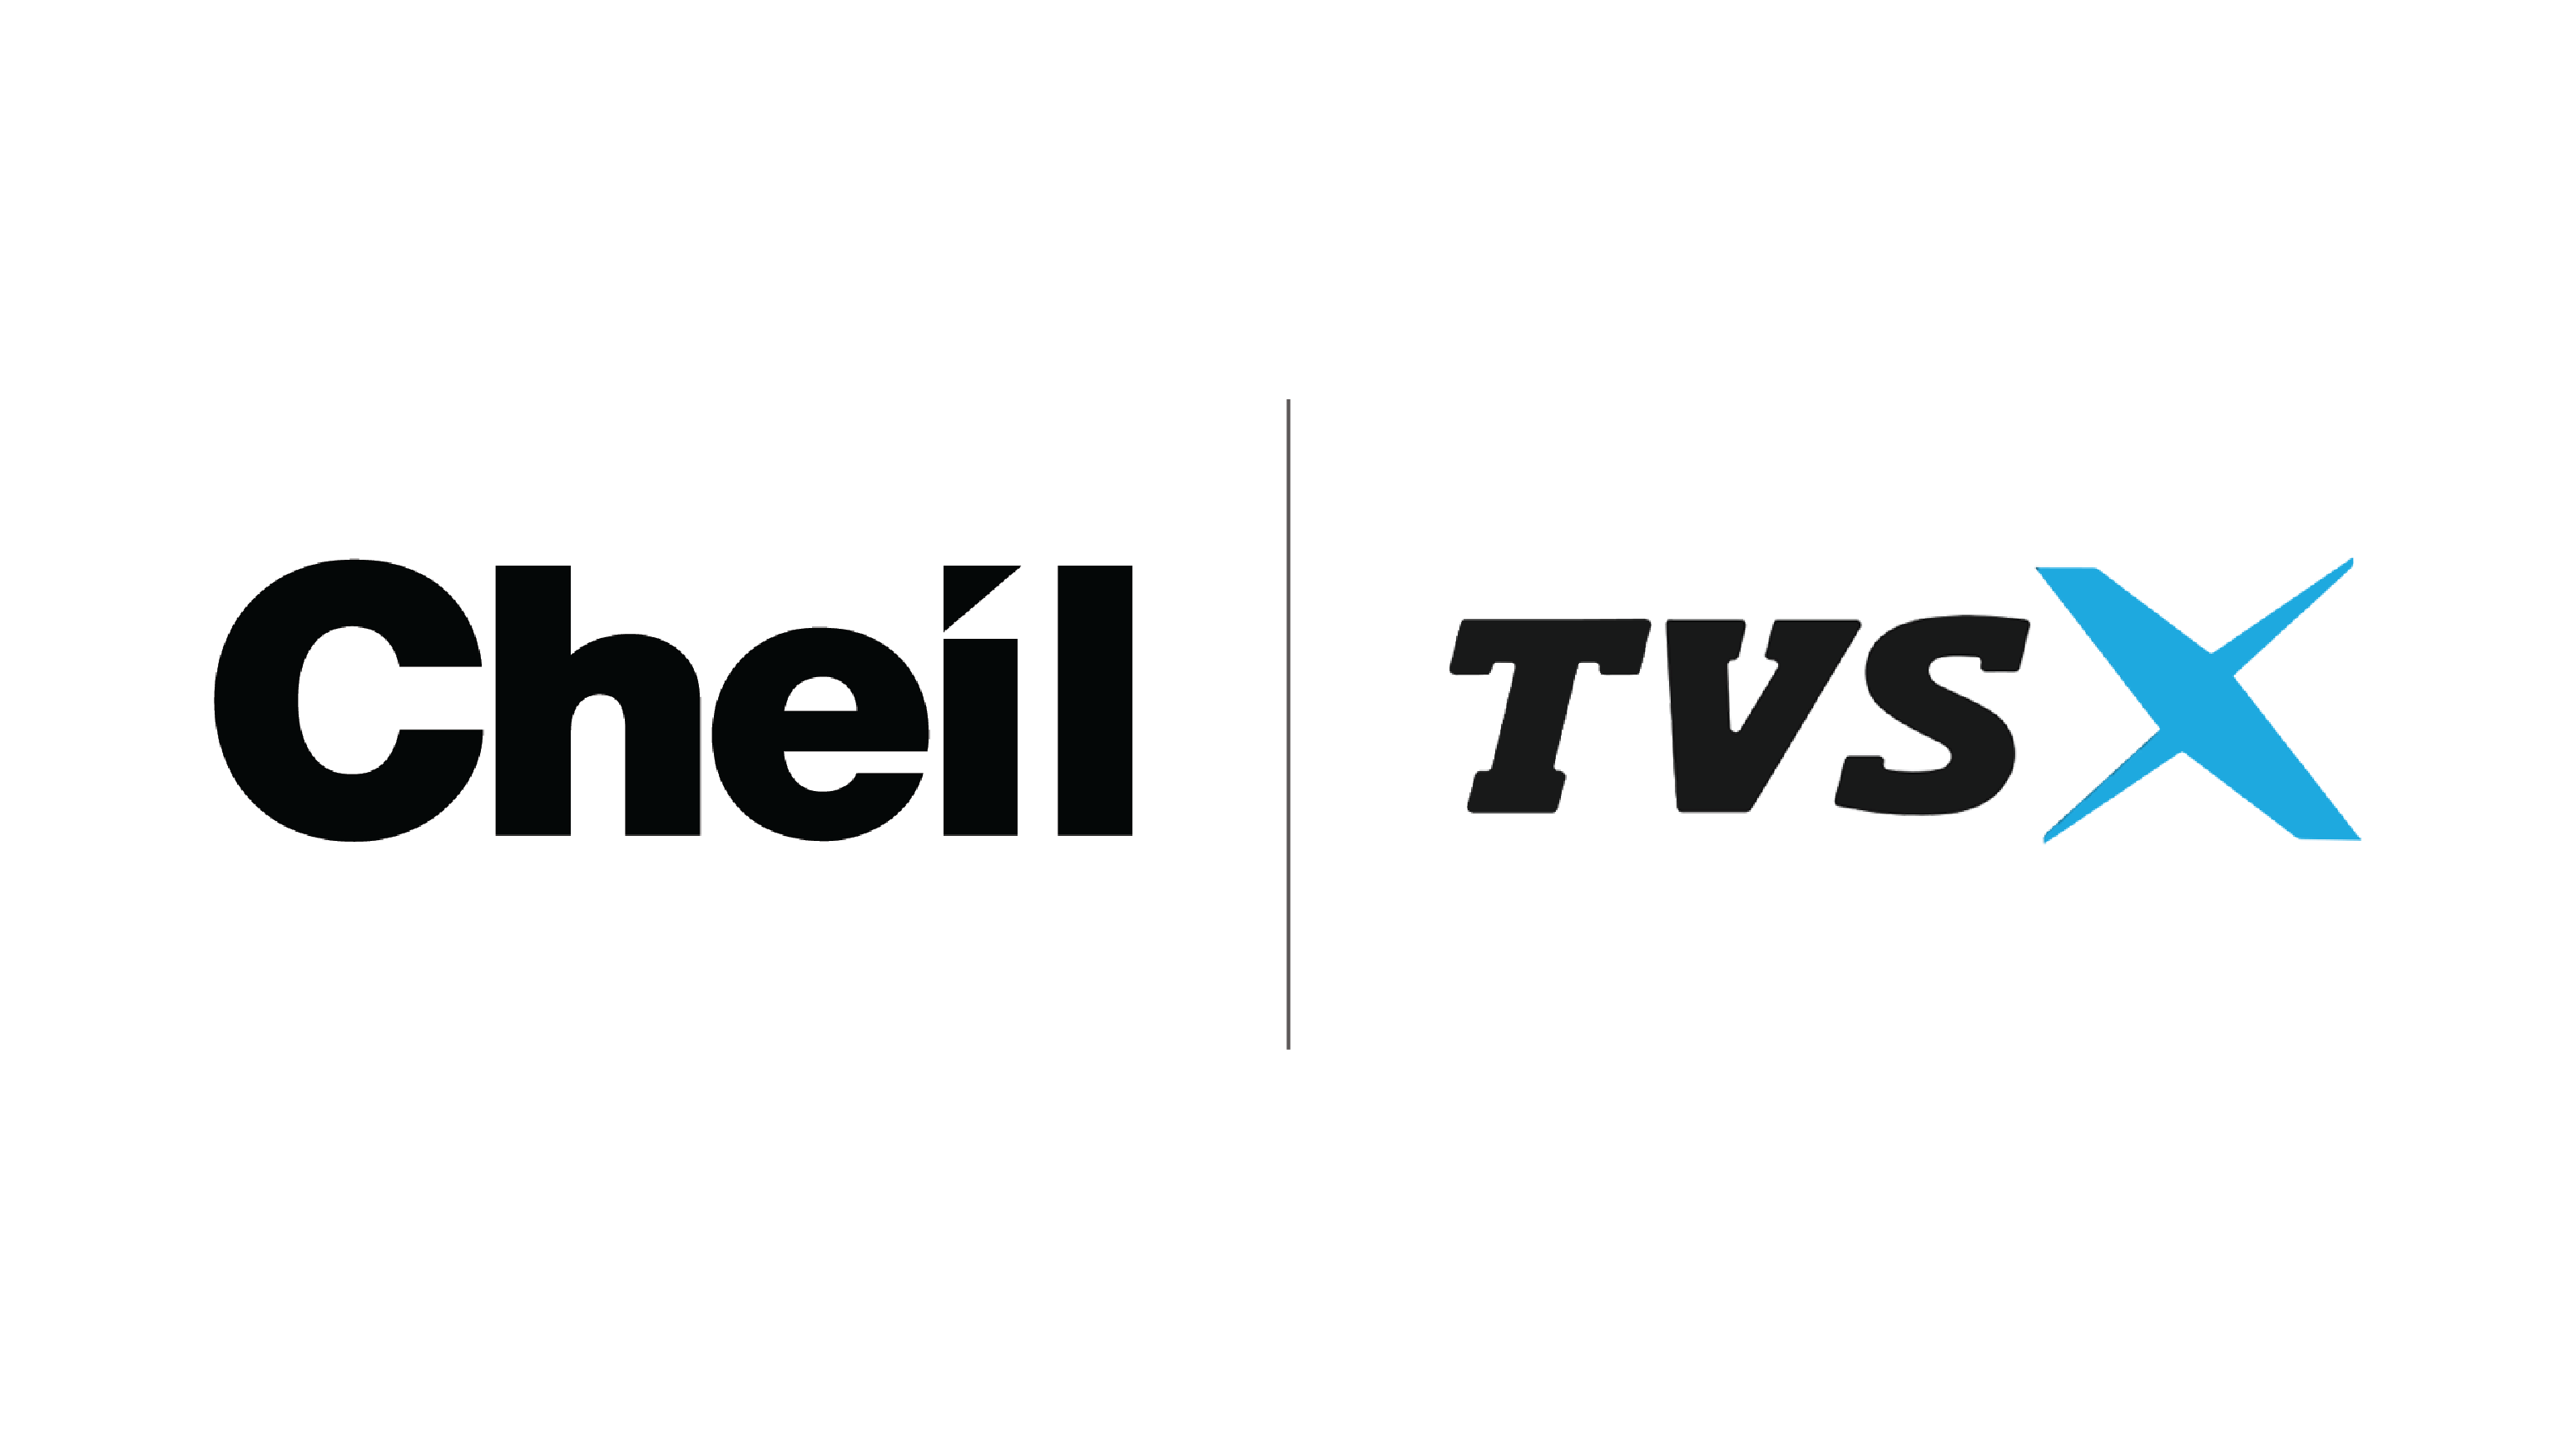 https://adgully.me/post/3174/cheil-india-thrills-dubai-with-the-launch-of-new-tvs-x